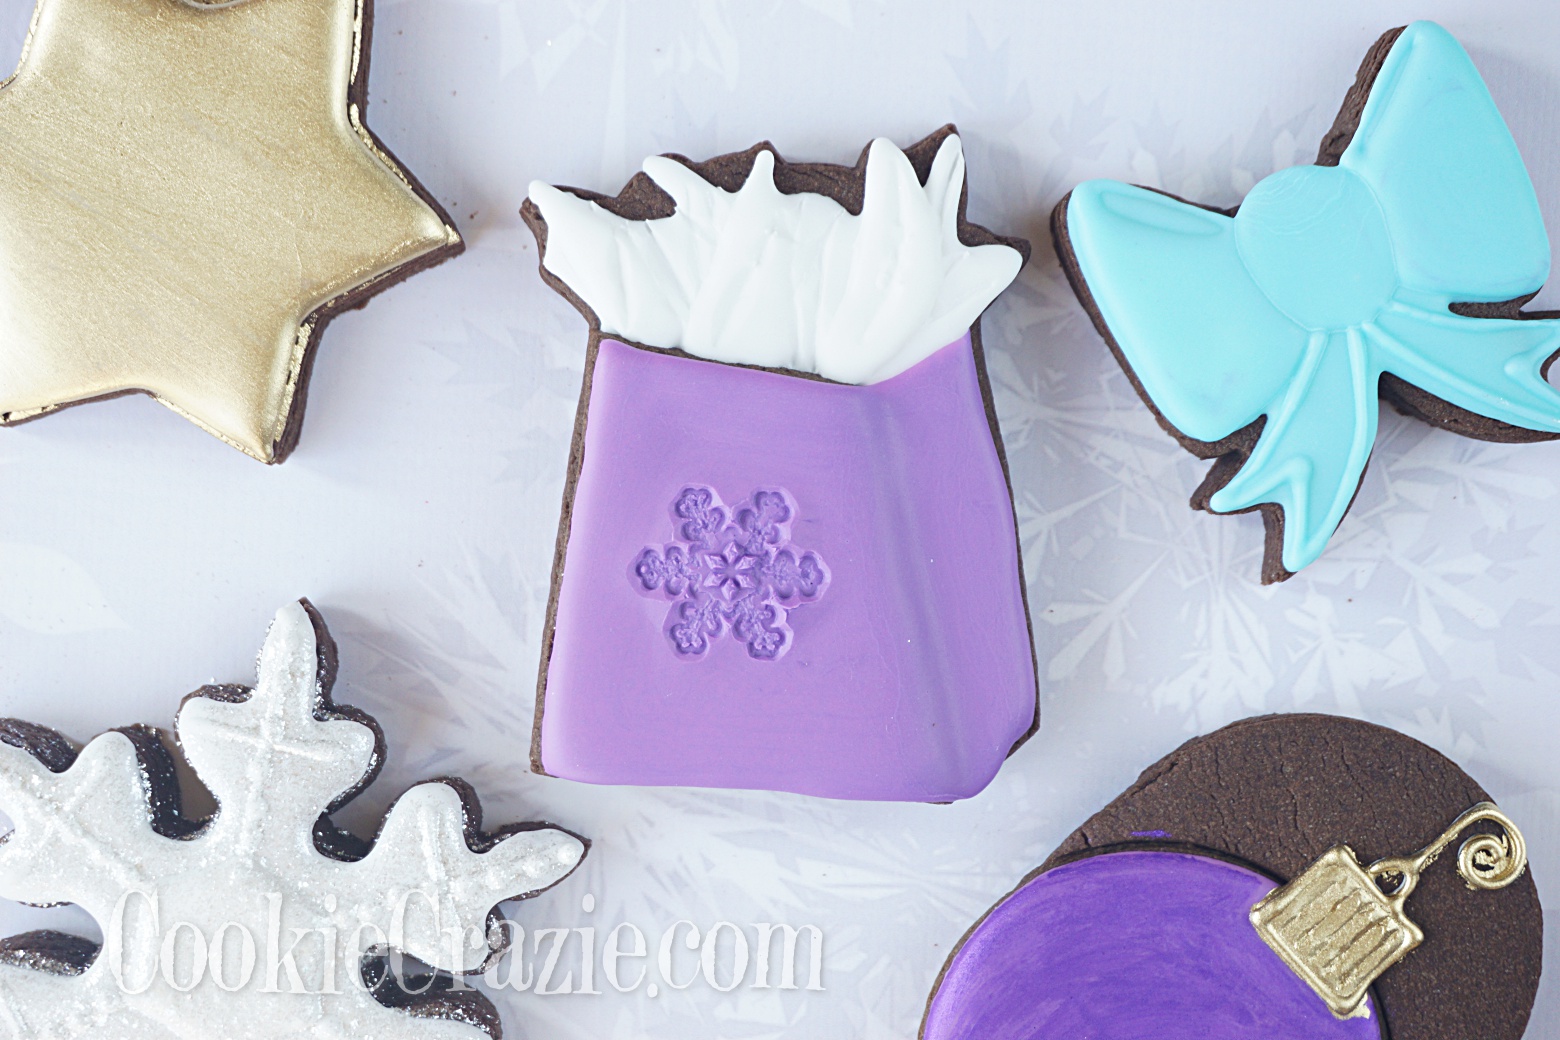  Snowflake Gift Bag Decorated Sugar Cookie YouTube video  HERE  